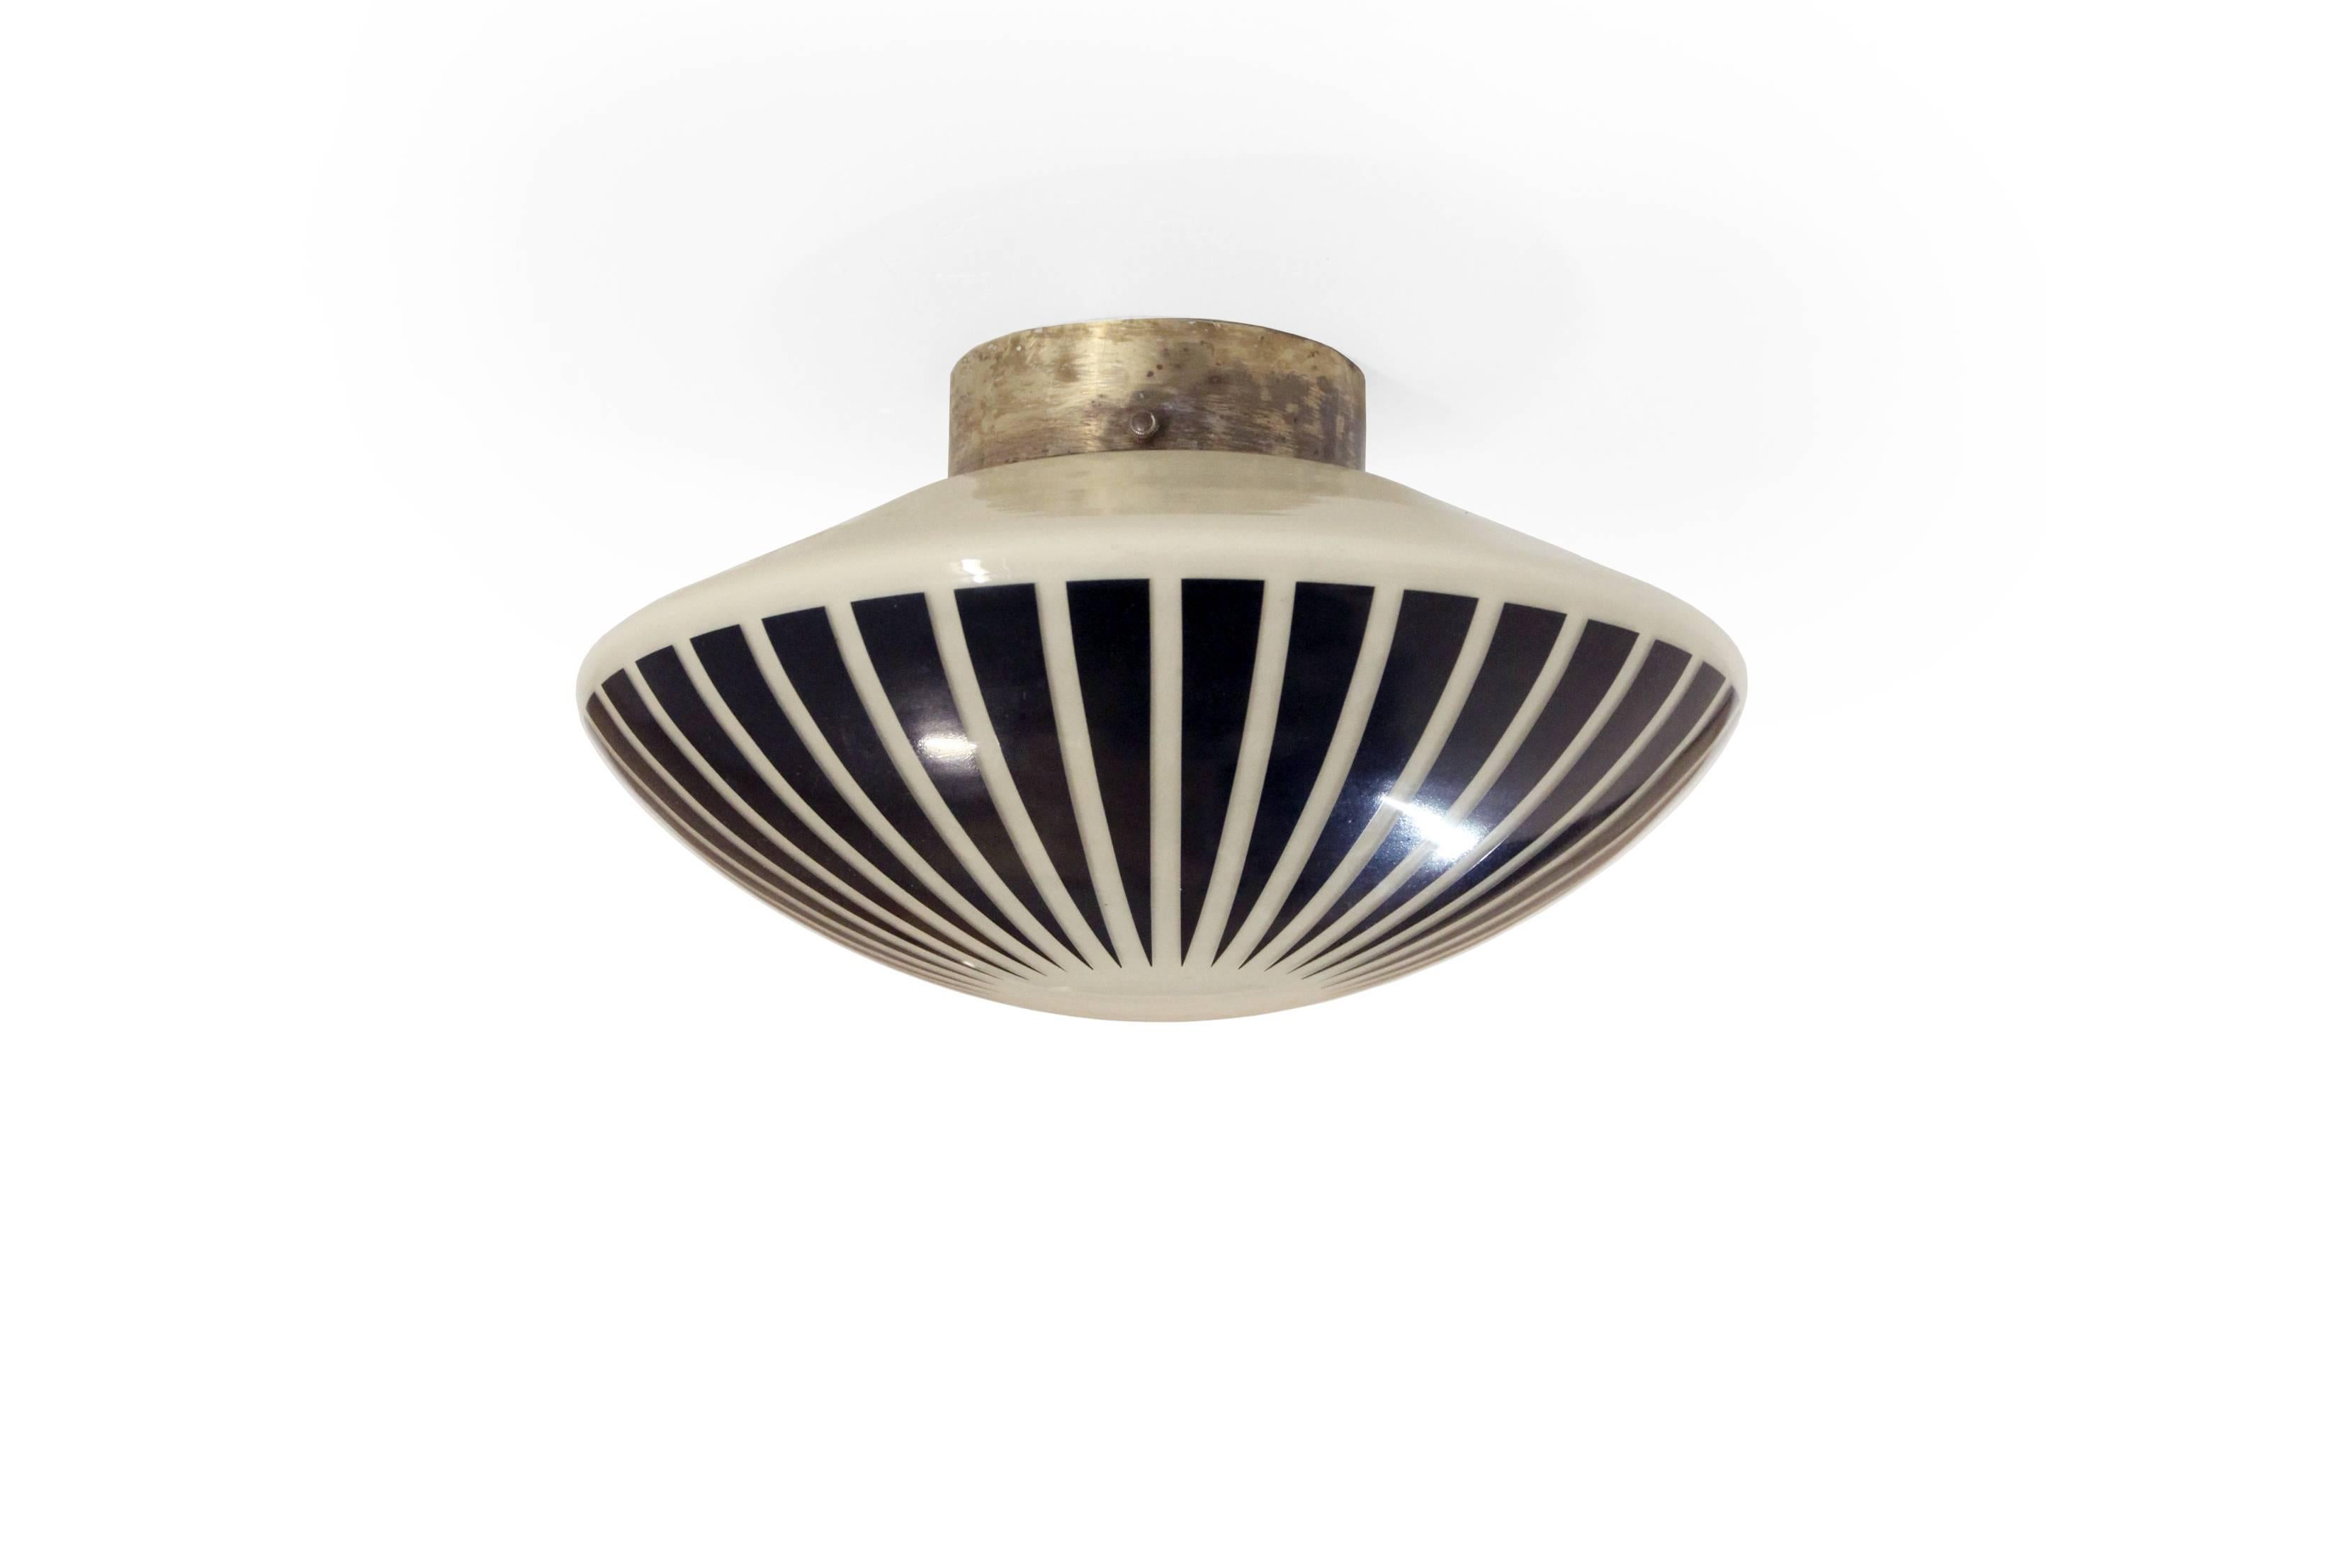 Wonderful and rare ceiling lamp with a base frame and opaline shade with surface decoration. Designed by Birger Dahl and made in Norway by Sønnico from circa 1960s second half. The lamp is fully working and in excellent vintage condition.

 